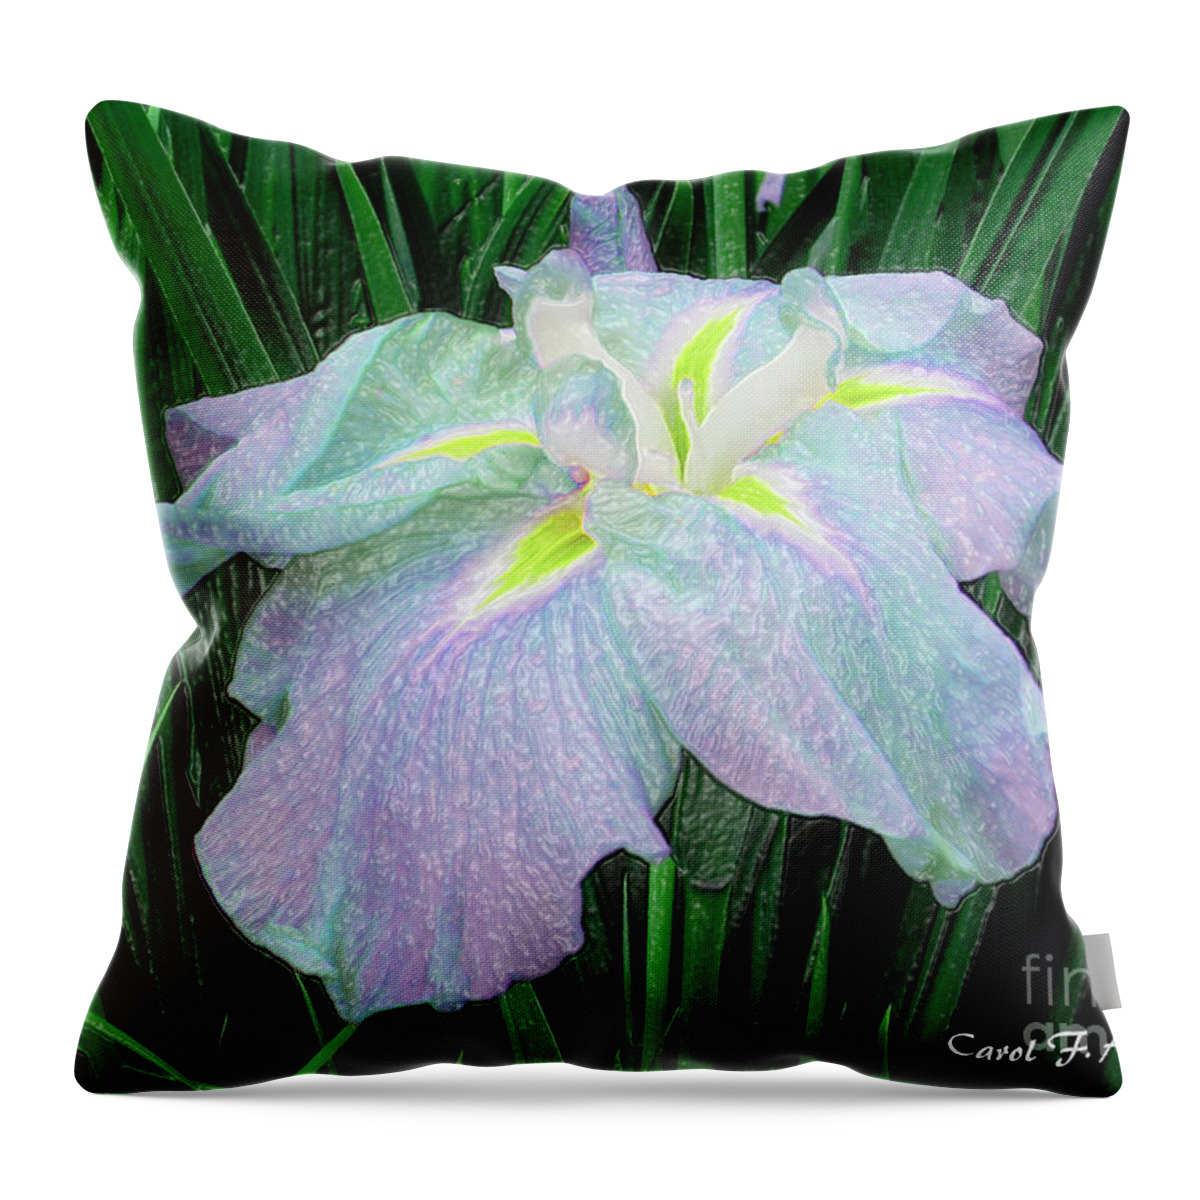 Lavender Throw Pillow featuring the photograph Painterly Colorful Iris by Carol F Austin